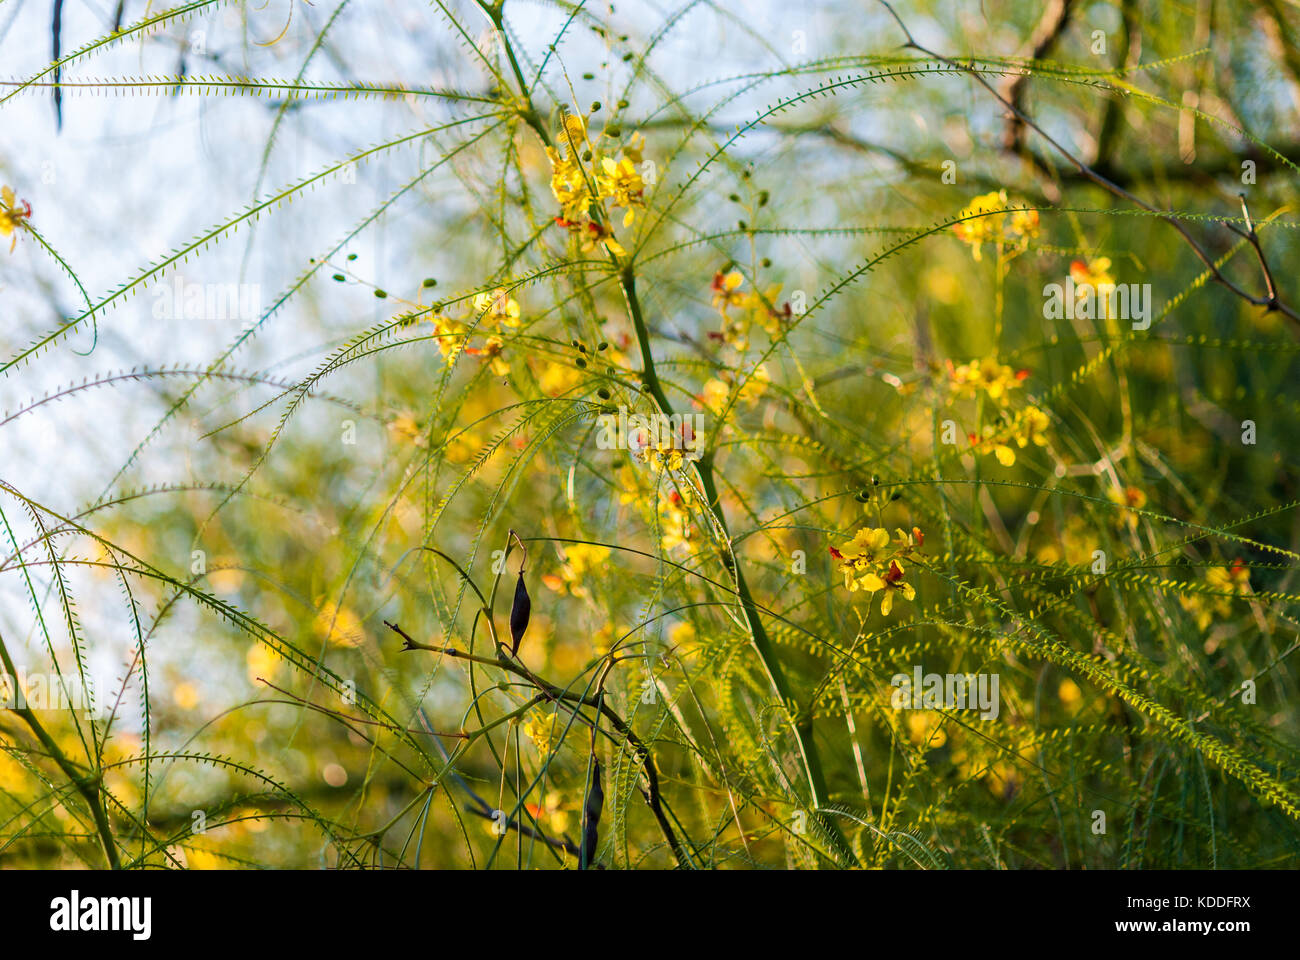 Desert Museum Palo Verde tree branches with flowers close-up Stock Photo